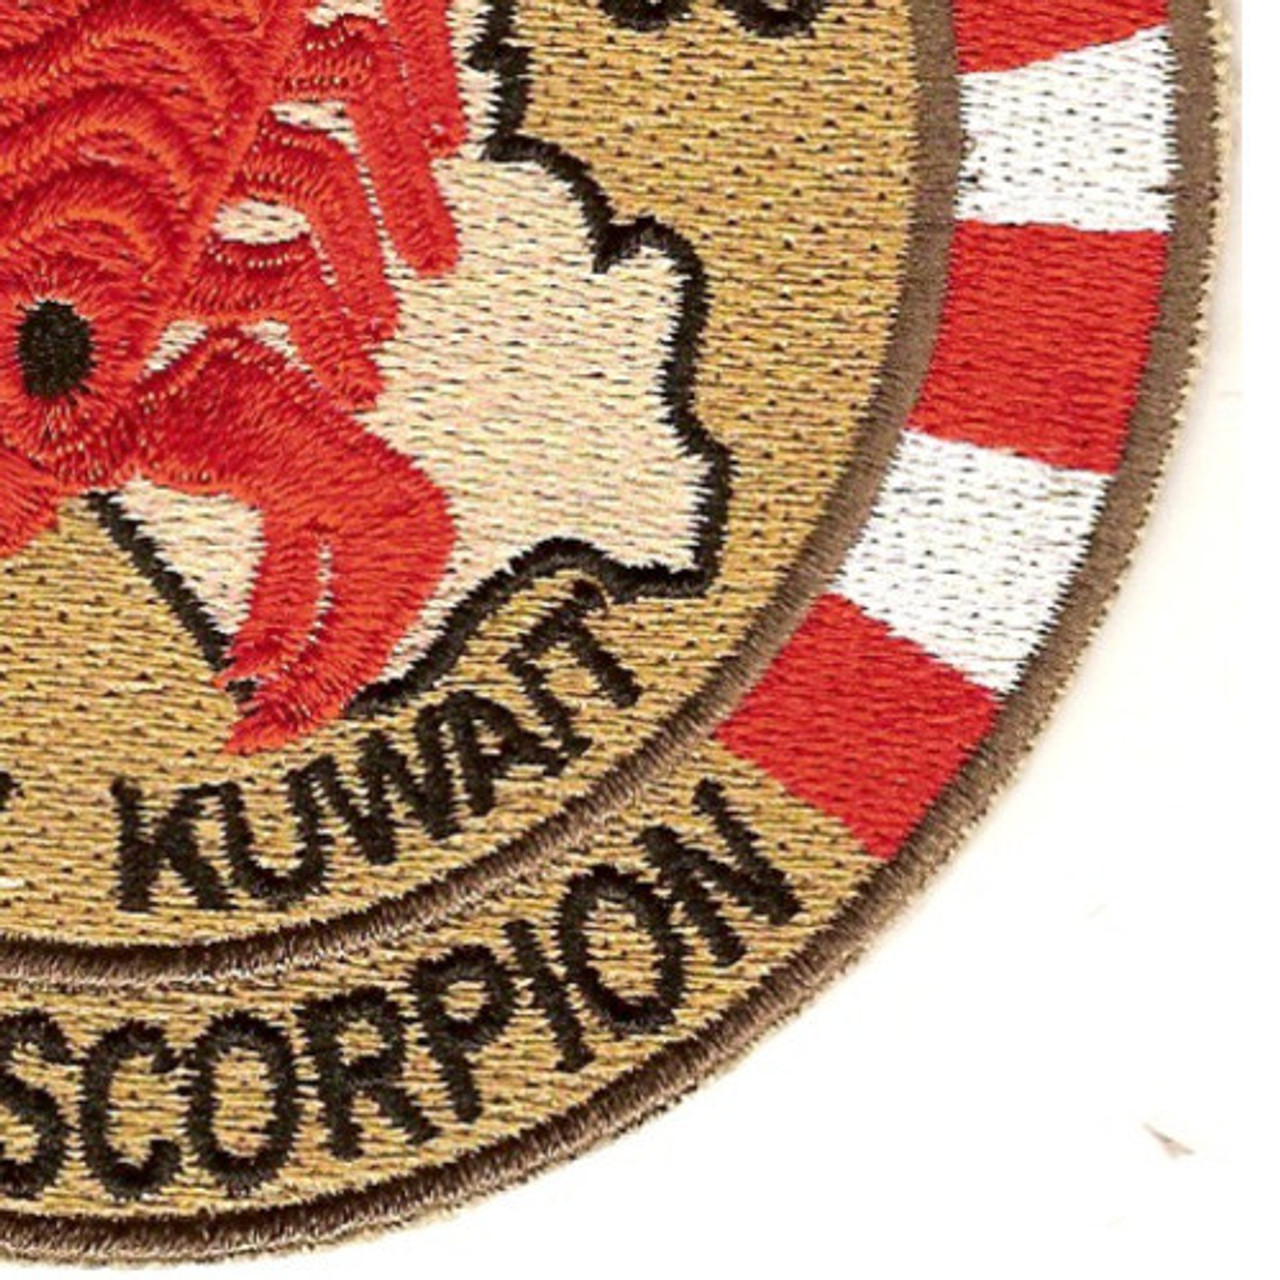 Special Forces Group Airborne Patch - OCP/Scorpion